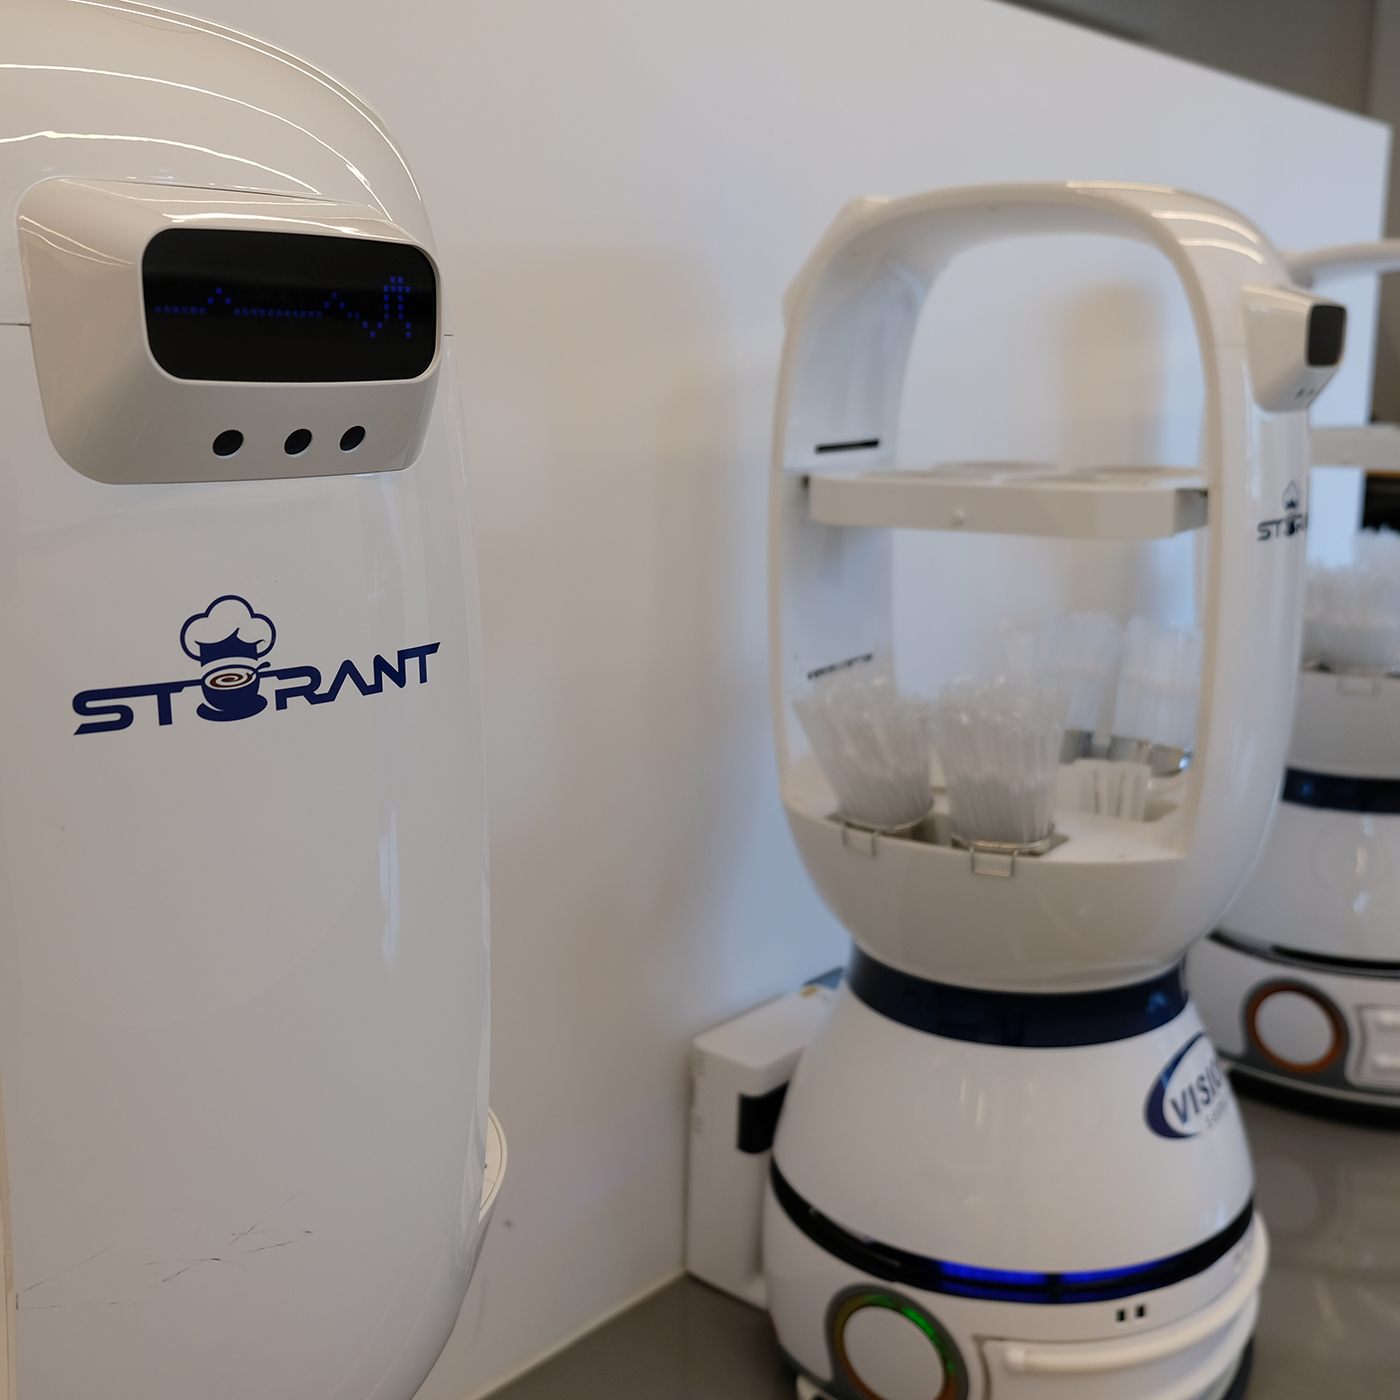 World's first 24h unmanned smart robot cafe